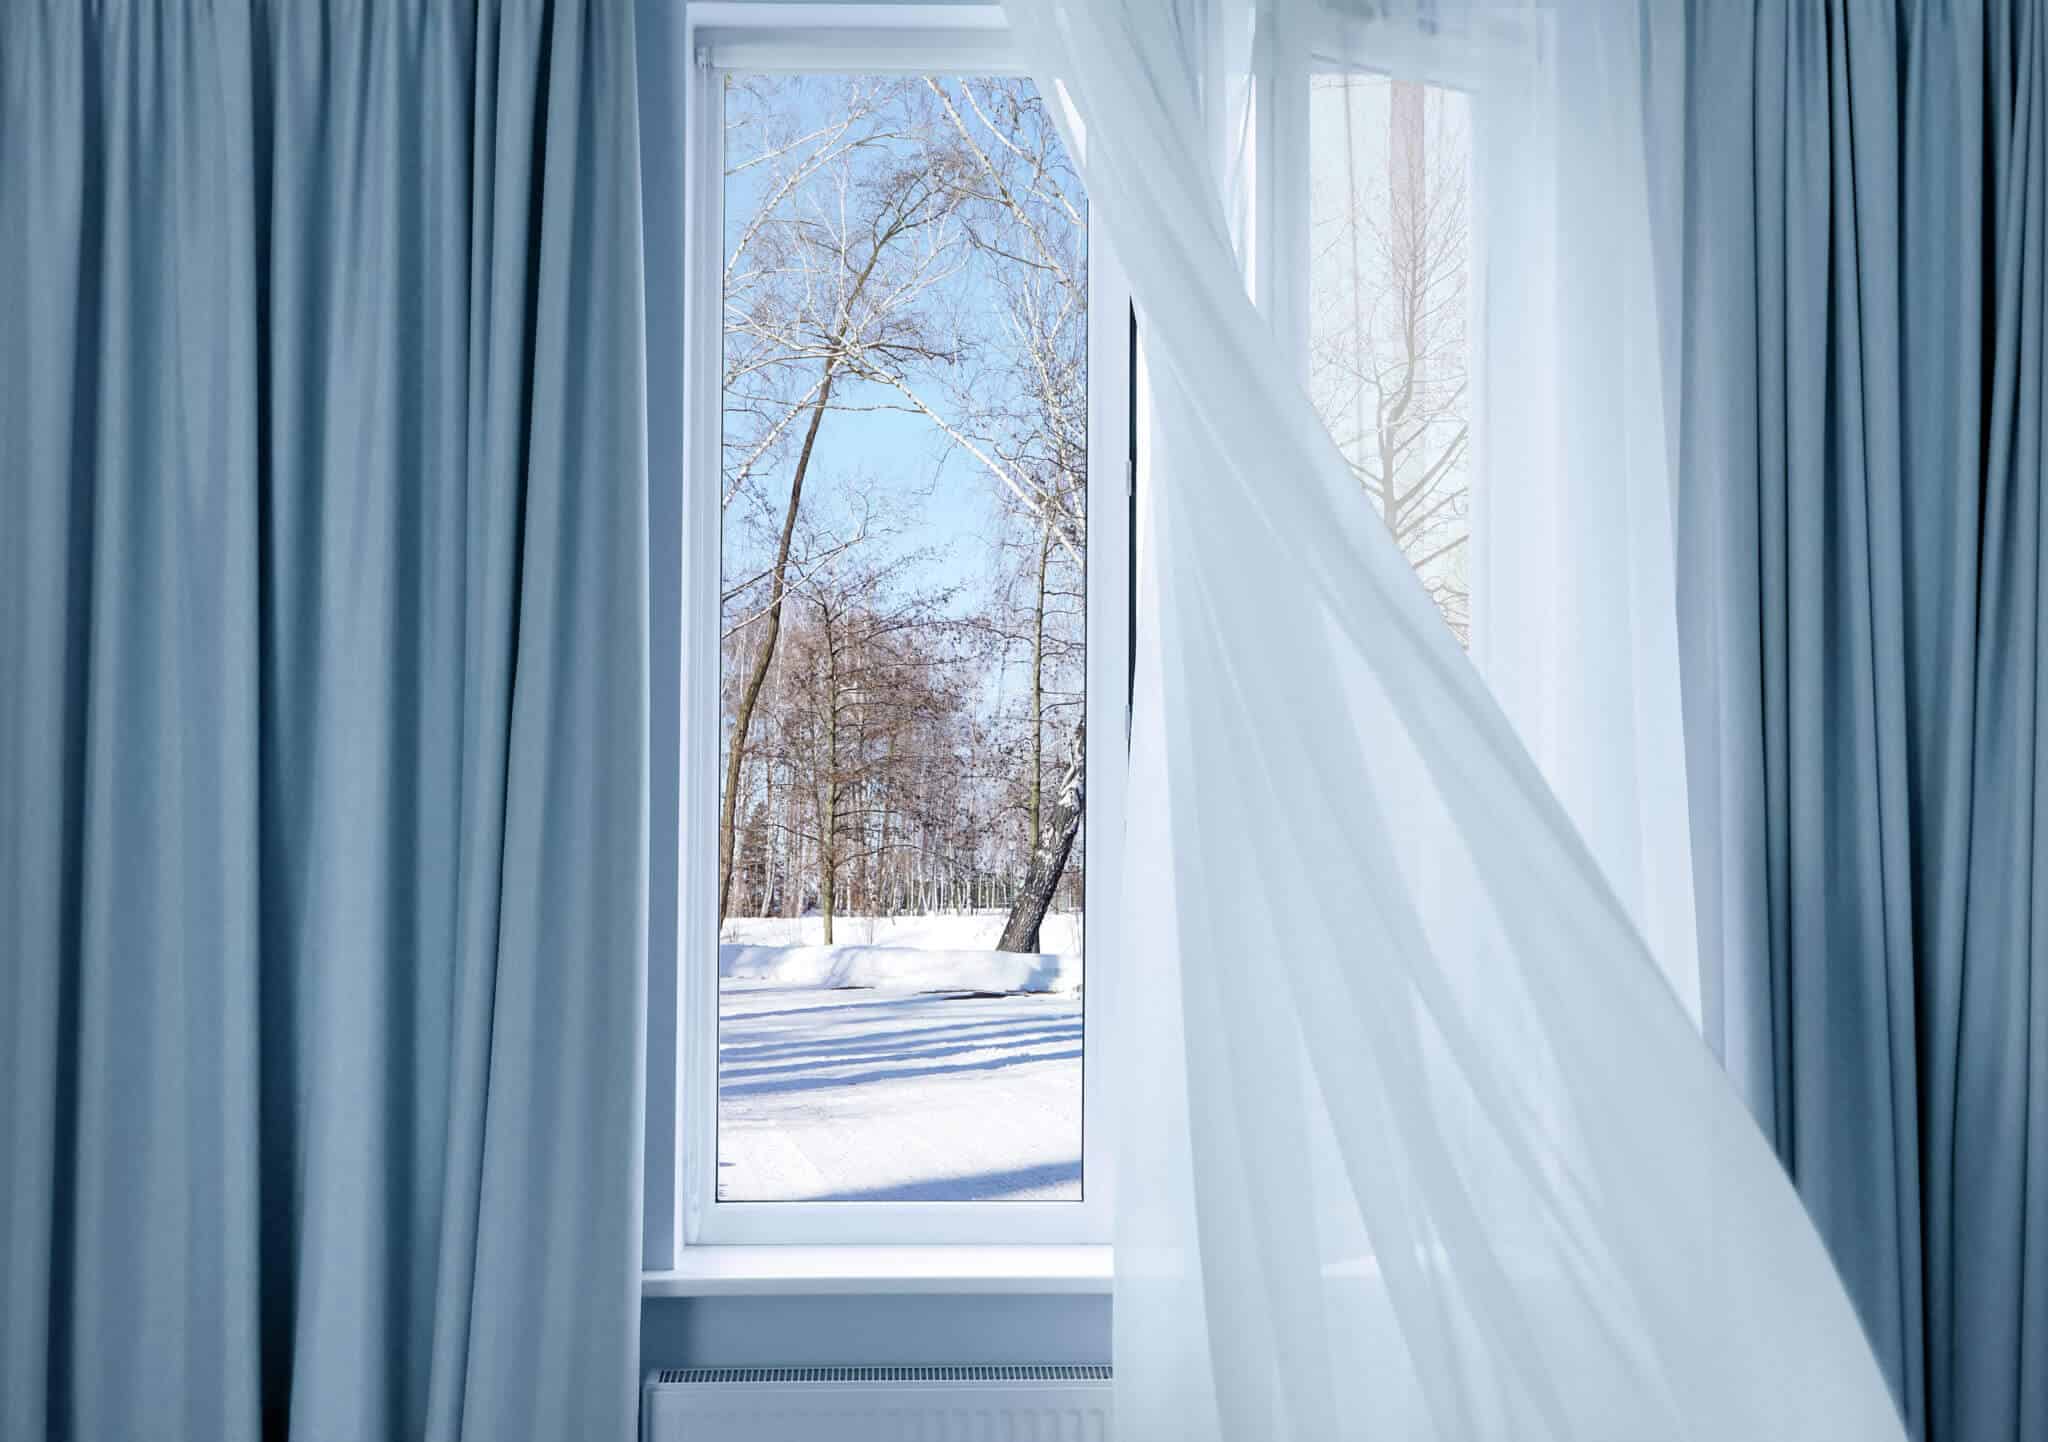 Light blue and sheer window curtains installed on a window, snowing outside. Insulating blinds for winter.